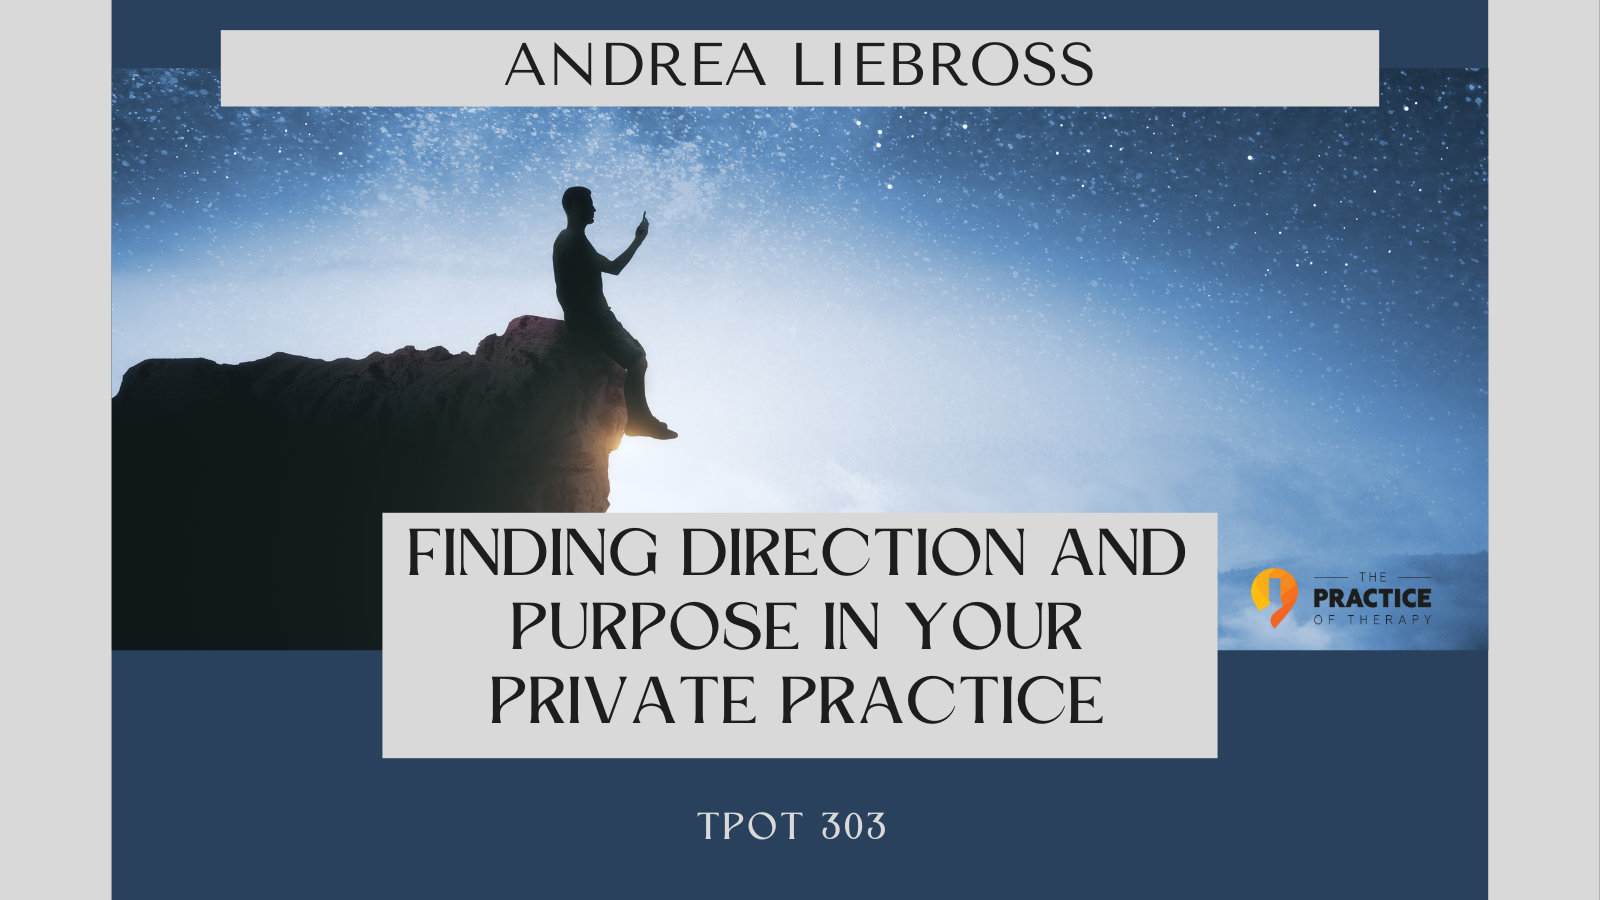 Andrea Liebross Finding Direction and Purpose in Your Private Practice TPOT 303